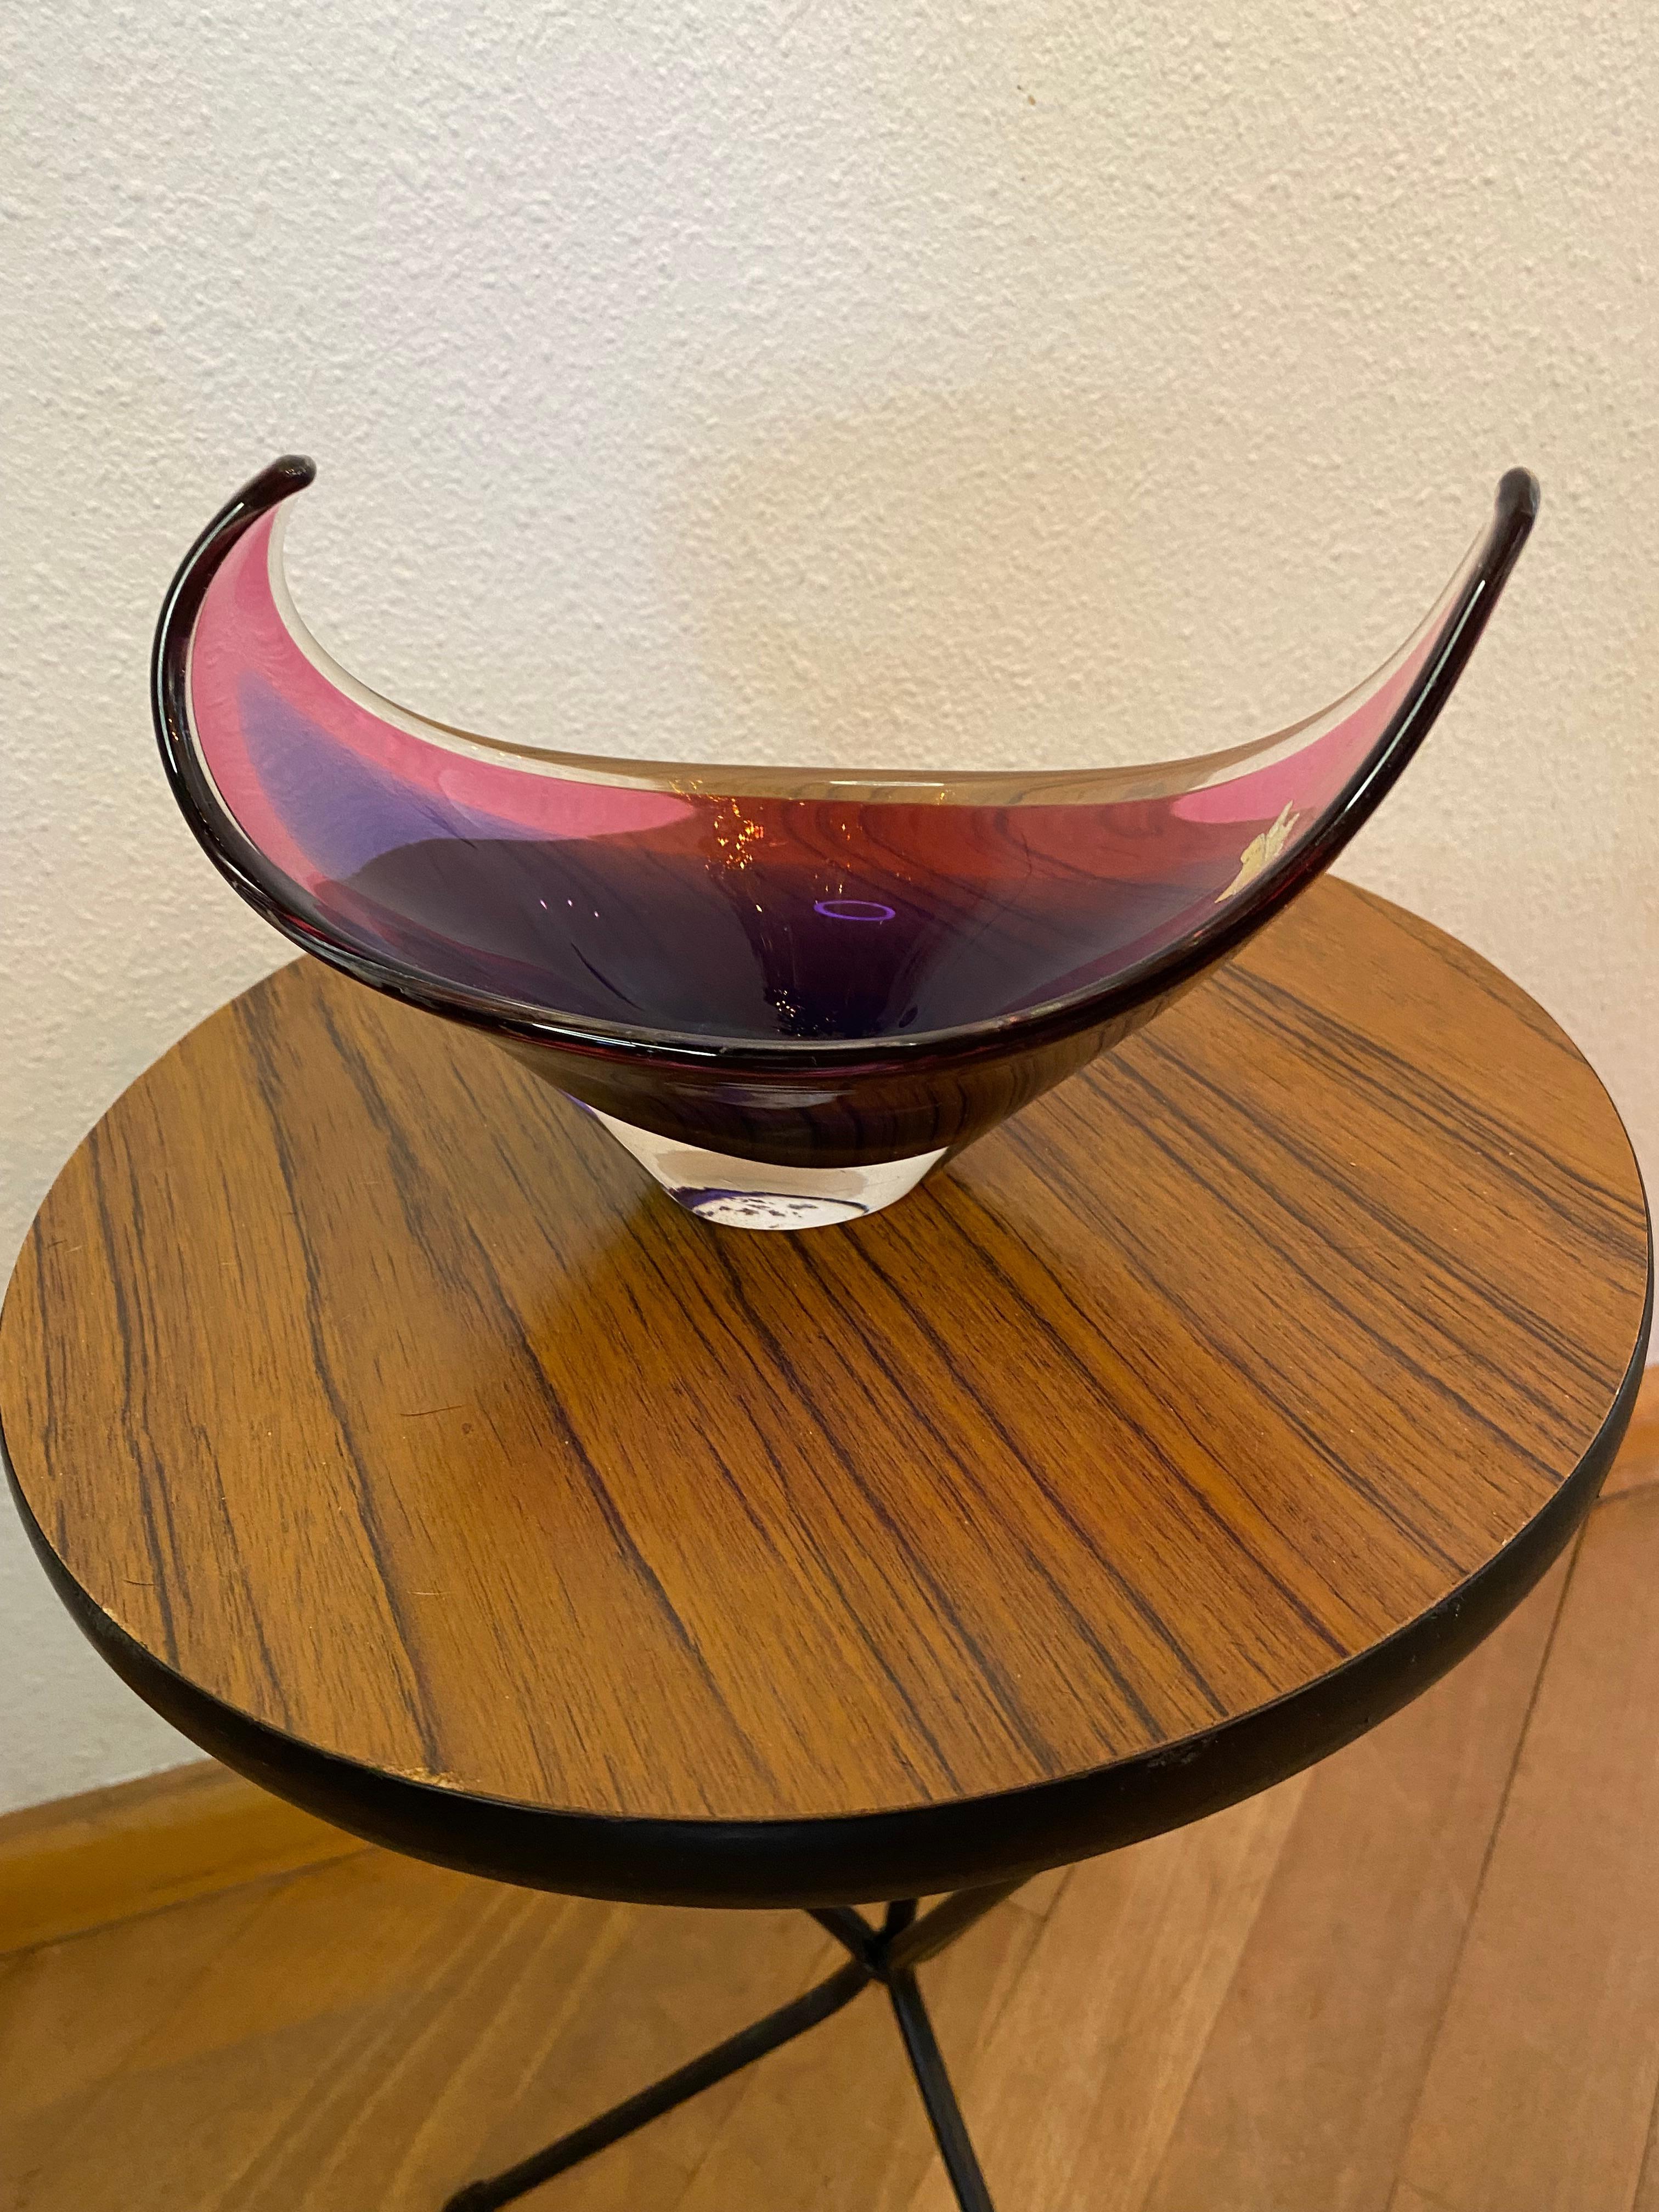 Stunning colored in two shades of purple small Murano glass bowl in a beautiful stylish shape.